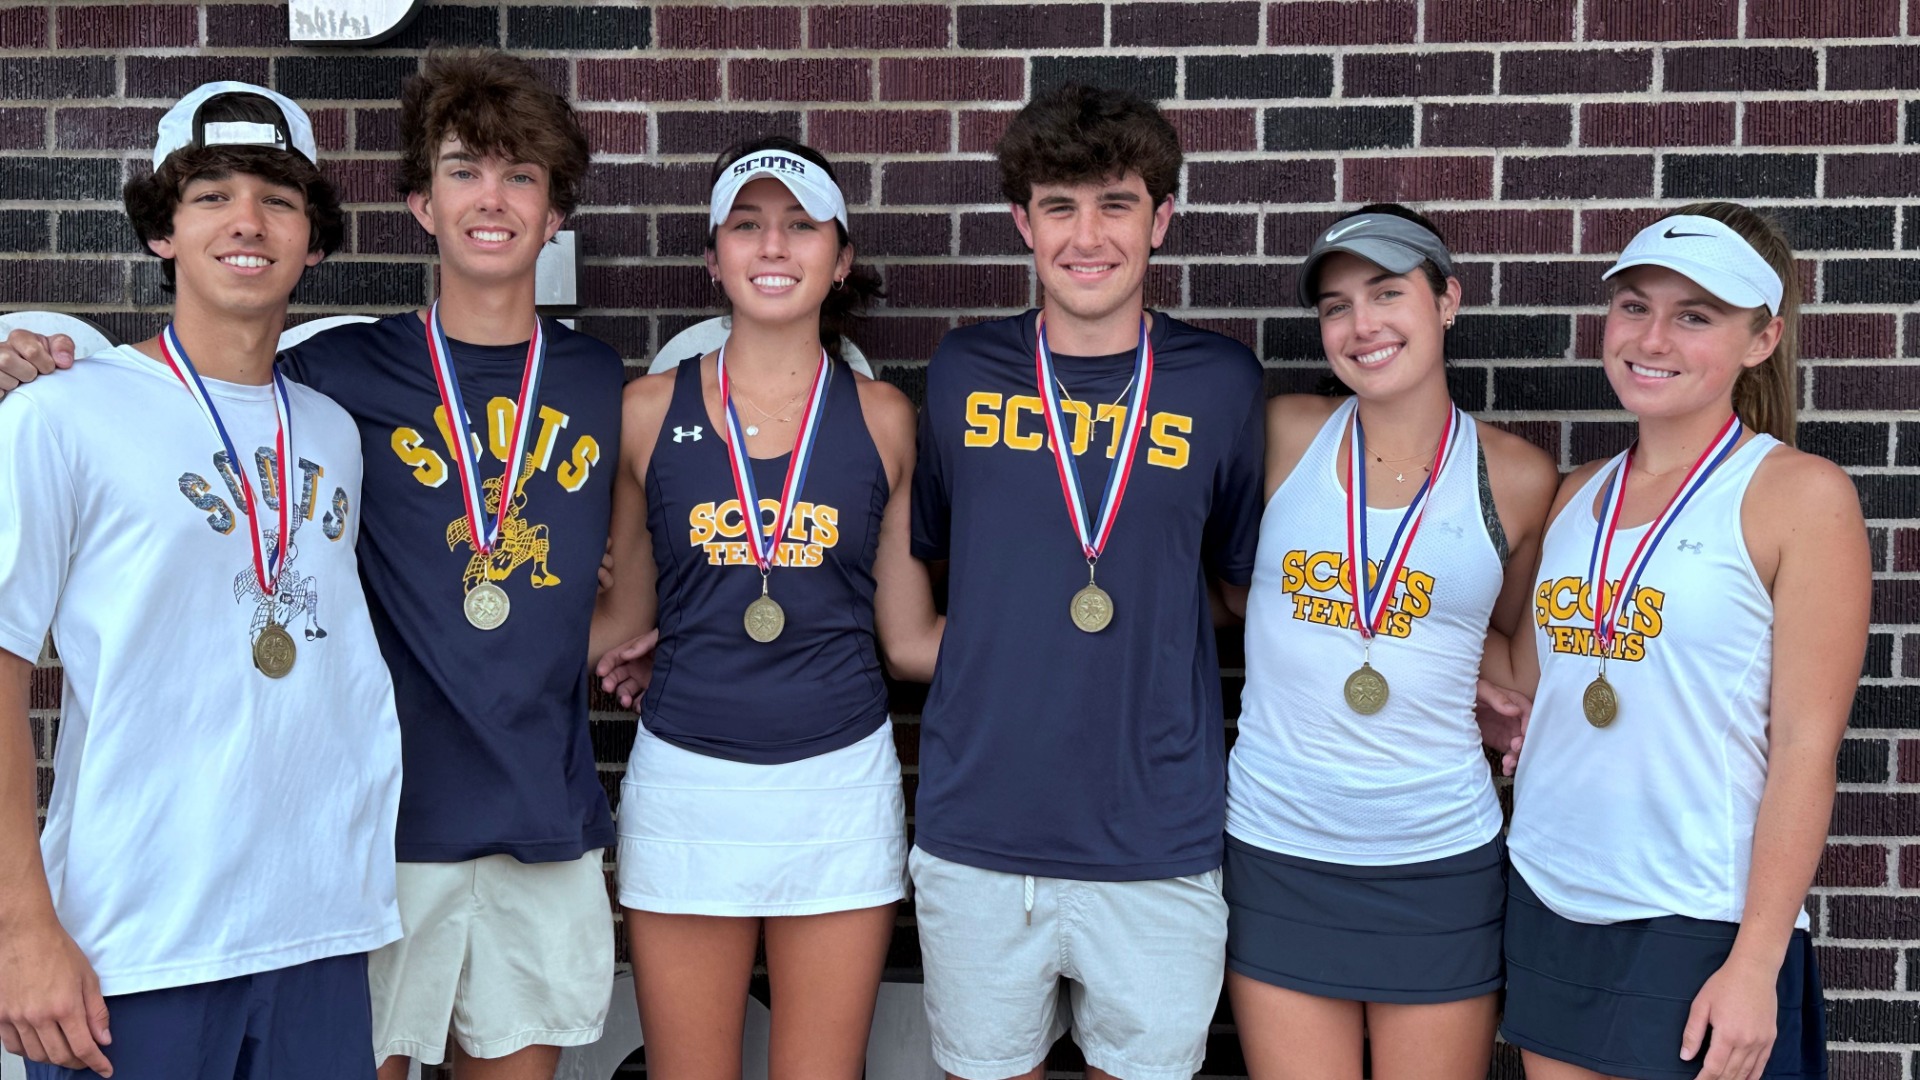 Slide 9 - Scots Varsity Tennis Team Competes Well at District Tournament